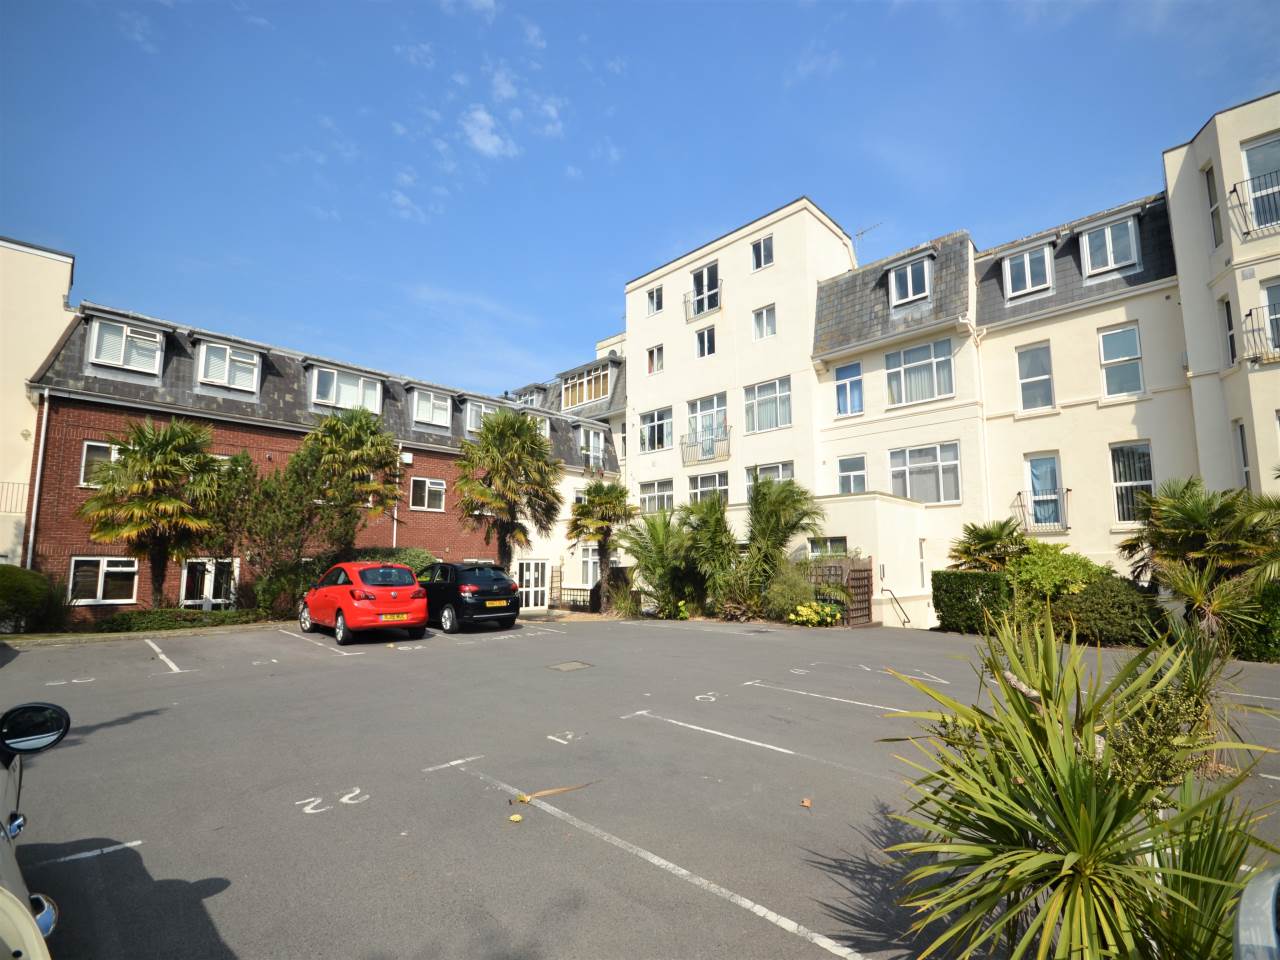 * MODERN APARTMENT * TWO DOUBLE BEDROOMS * EN SUITE * MODERN BATHROOM & KITCHEN * SECURE ALLOCATED PARKING * 500 YARDS FROM BLUE FLAG BEACHES *  